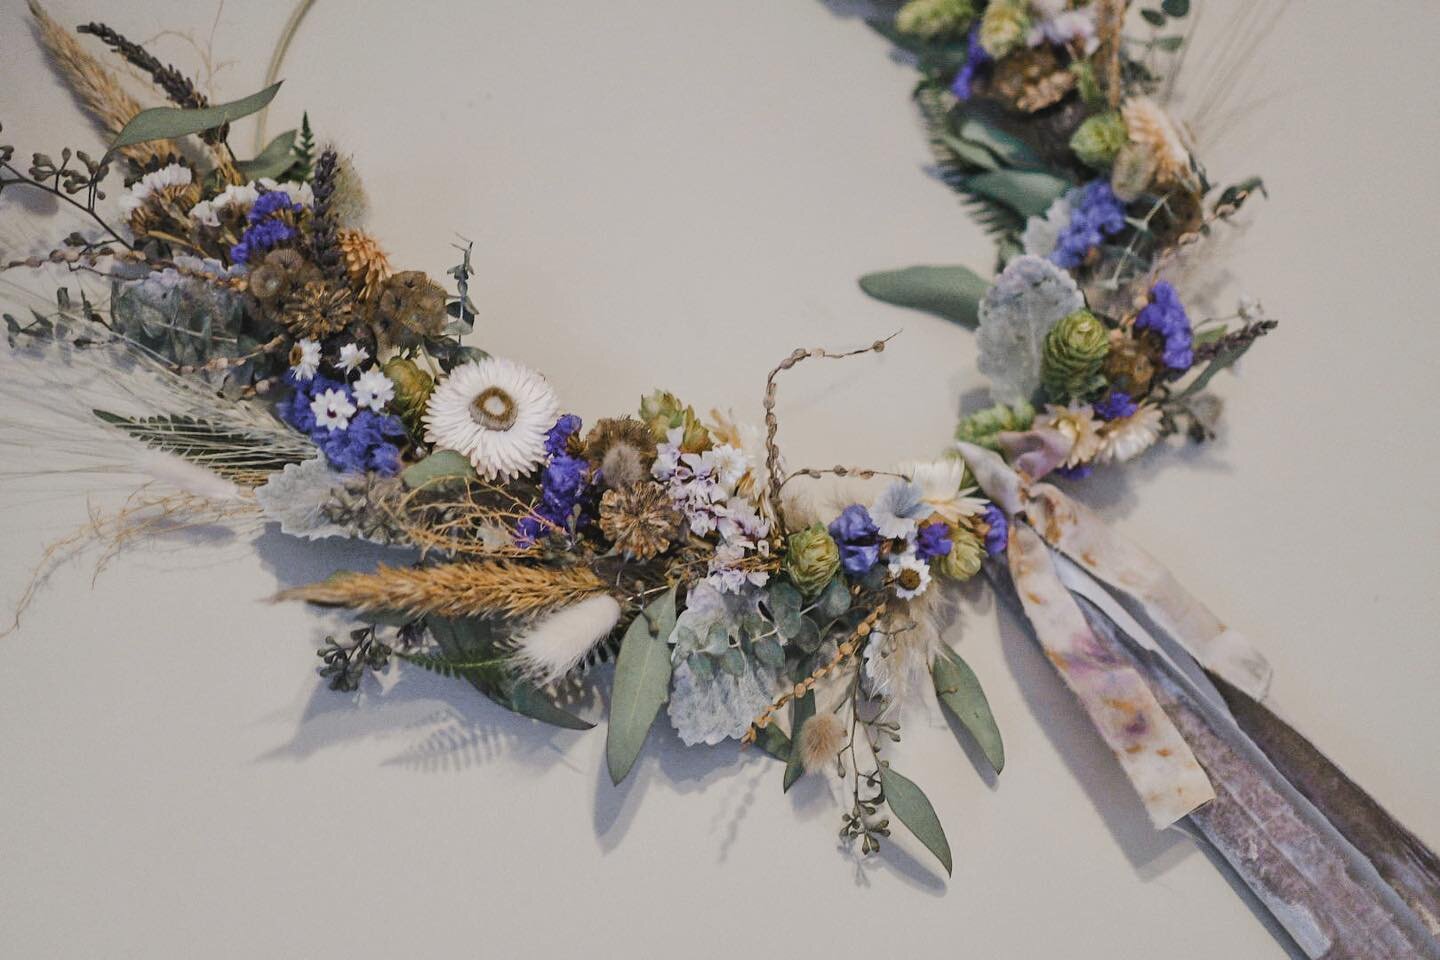 I have been drying flowers crazy lately, every day picking a few more bunches to dry, and some as experiments too! Last year I really got into dried florals and I am excited to offer more of that this fall/winter when all of the fresh flowers are fin